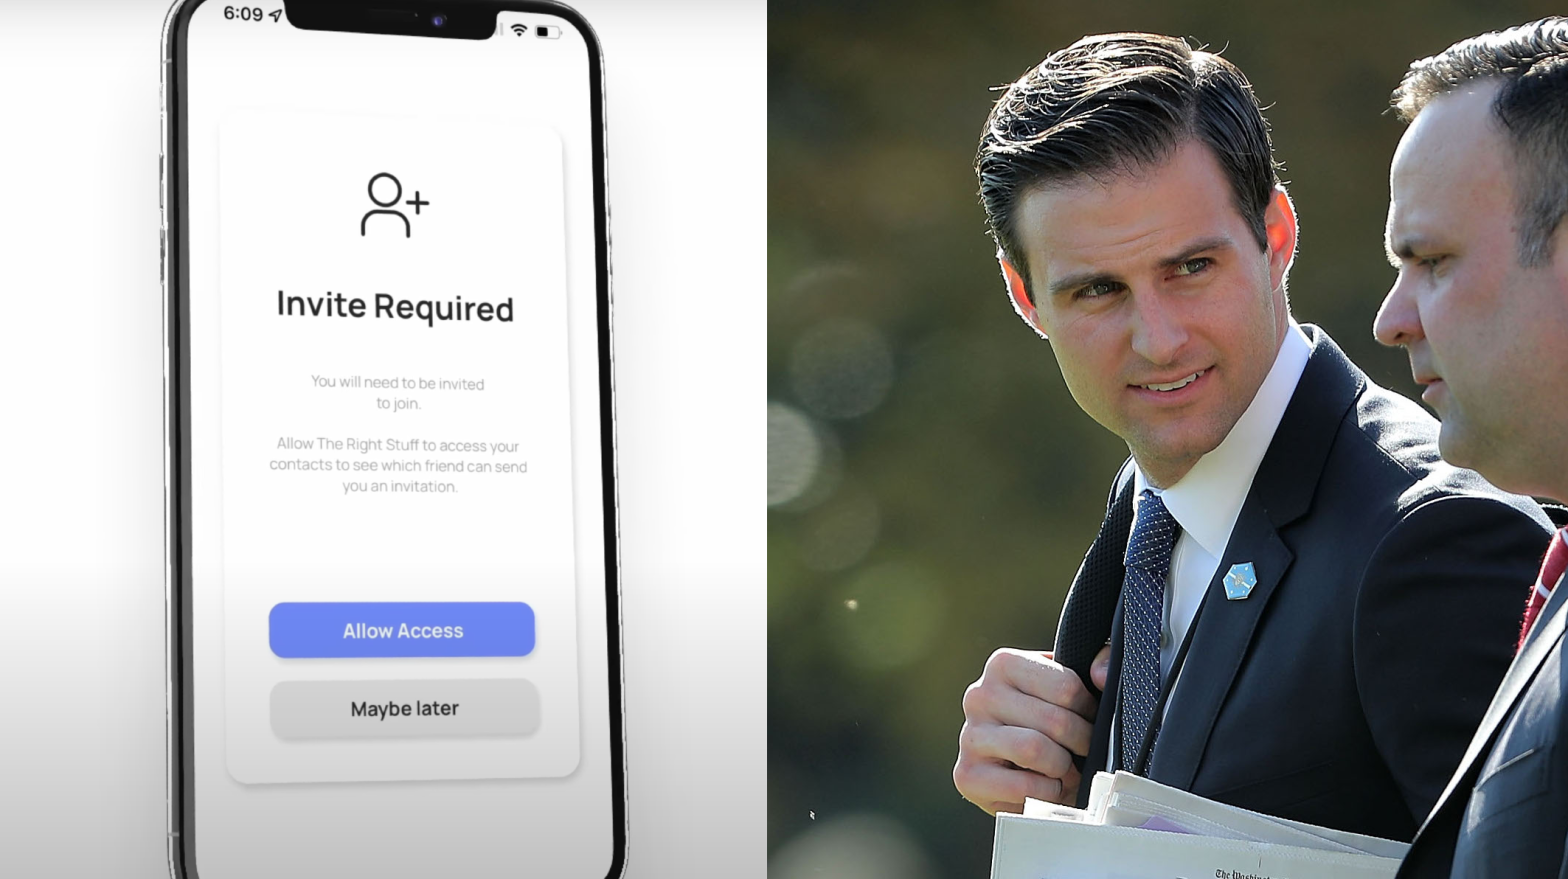 Former aide to President Donald Trump John McEntee has been promoting his so-called conservative dating app The Right Stuff since its release in September, but two analytics firms have reported few people have actually downloaded it. (Photo: Screenshot/Gizmodo - Chip Somodevilla/Getty Images)